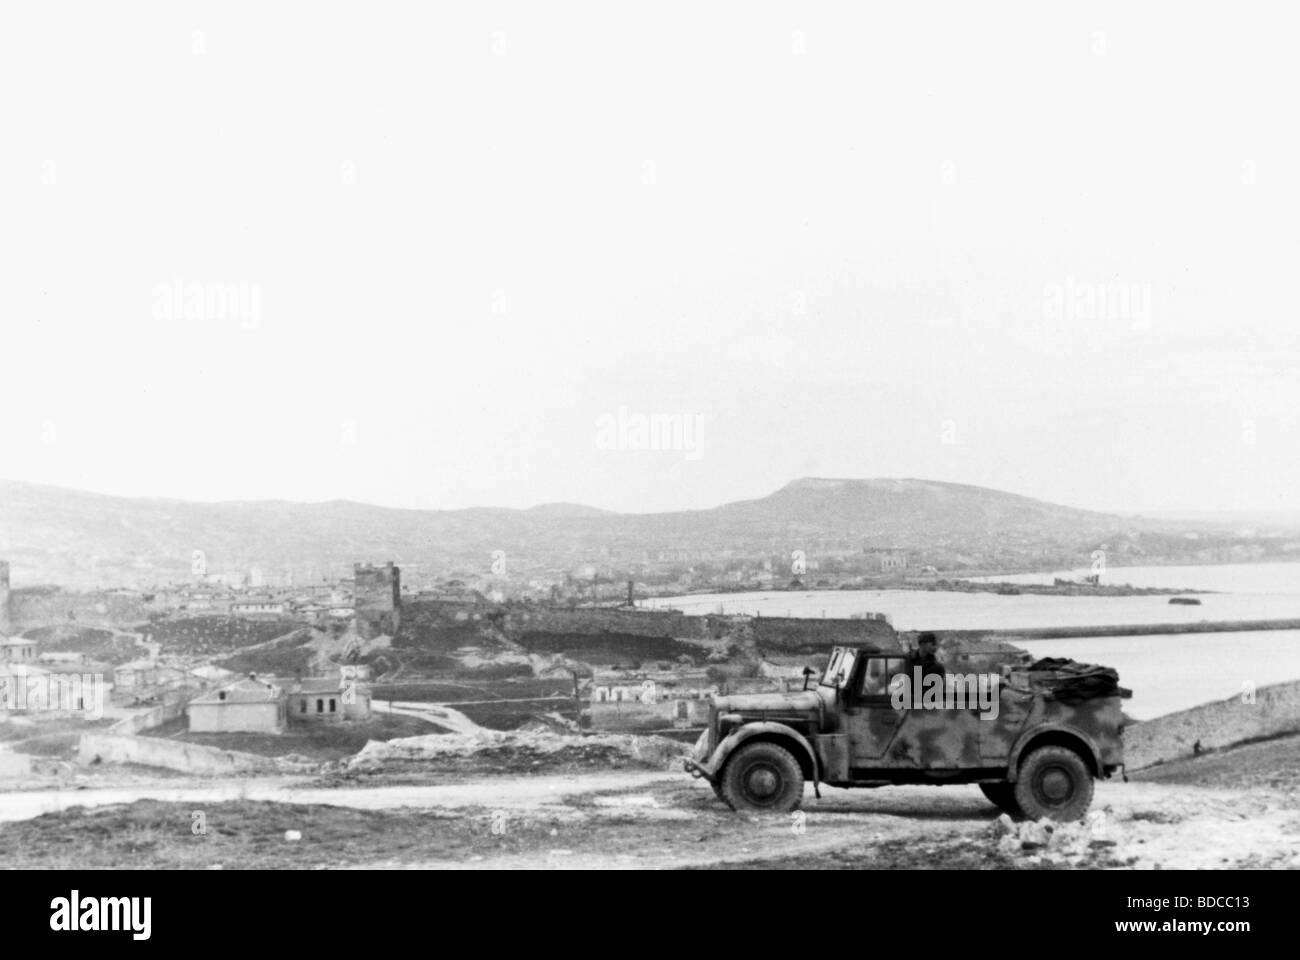 events, Second World War / WWII, Russia 1944 / 1945, Crimea, Wehrmacht car at Sevastopol, spring 1944, Third Reich, military, 20th century, historic, historical, Eastern Front, USSR, Soviet Union, bay, coast, Ukraine, people, 1940s, Stock Photo